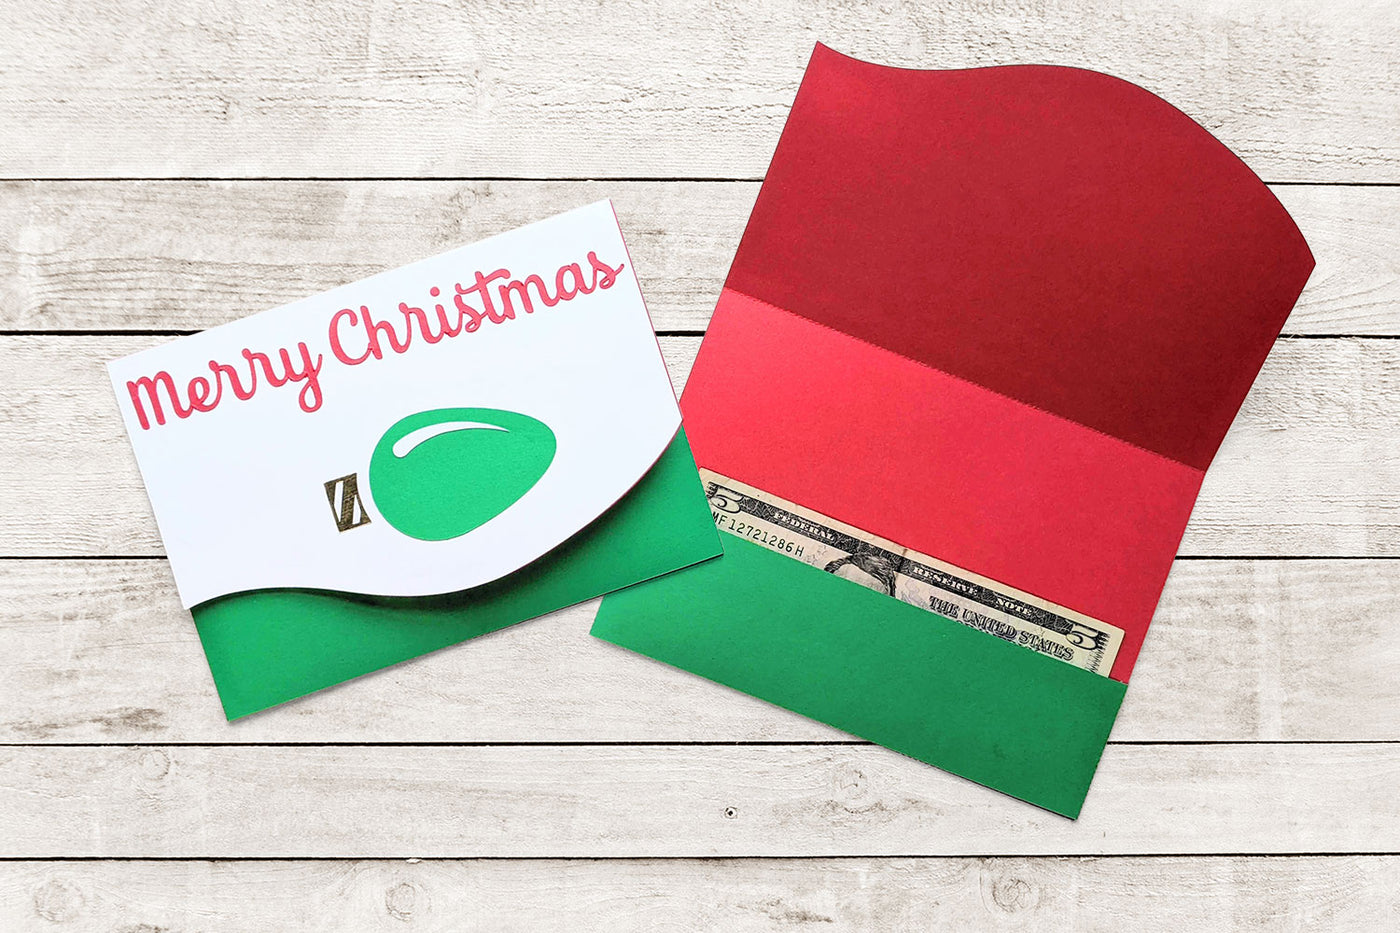 Merry Christmas with light bulb card SVG with dollar bill pocket